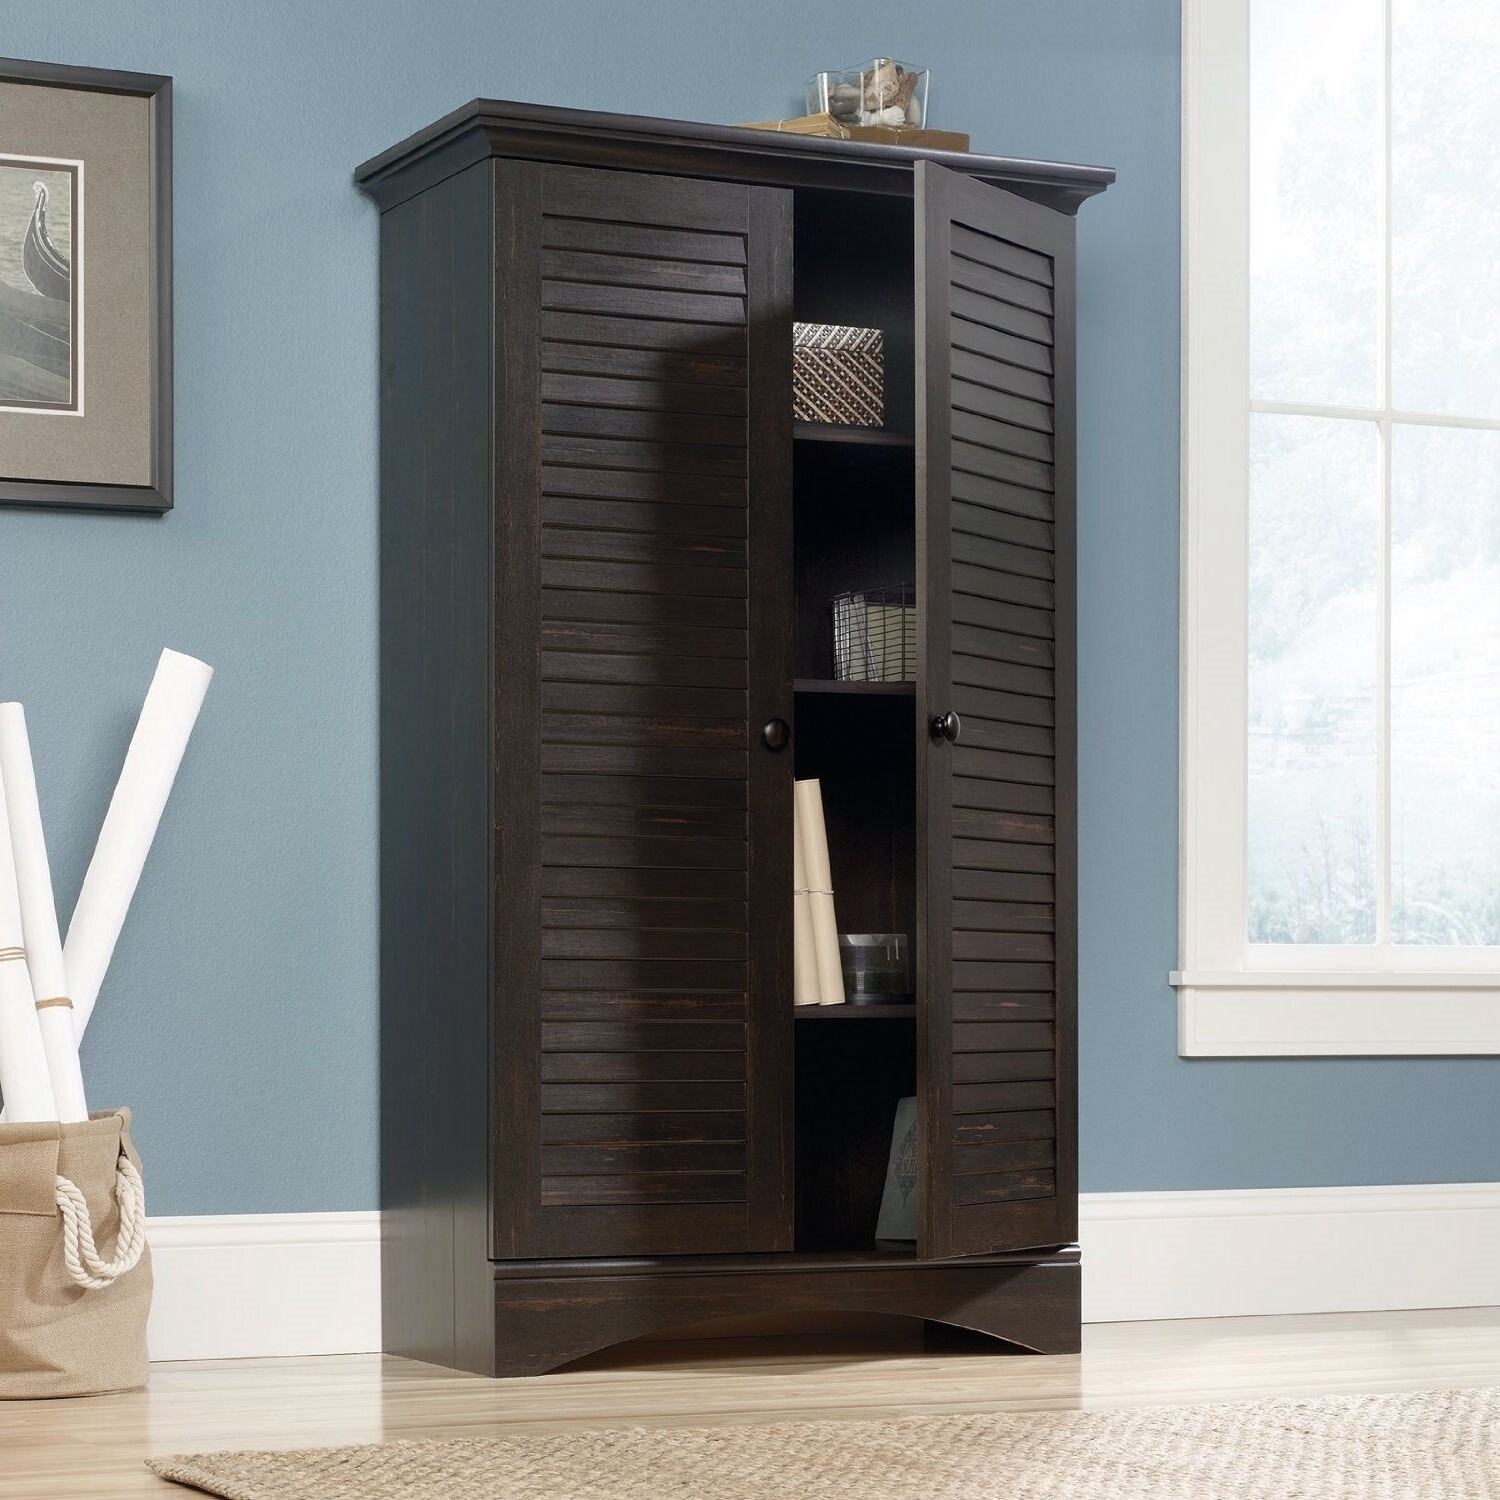 https://ak1.ostkcdn.com/images/products/is/images/direct/aa4f8b45257ad370f2b151620d94bcae736c9311/Multi-Purpose-Wardrobe-Armoire-Storage-Cabinet-in-Dark-Brown-Antique-Wood-Finish.jpg